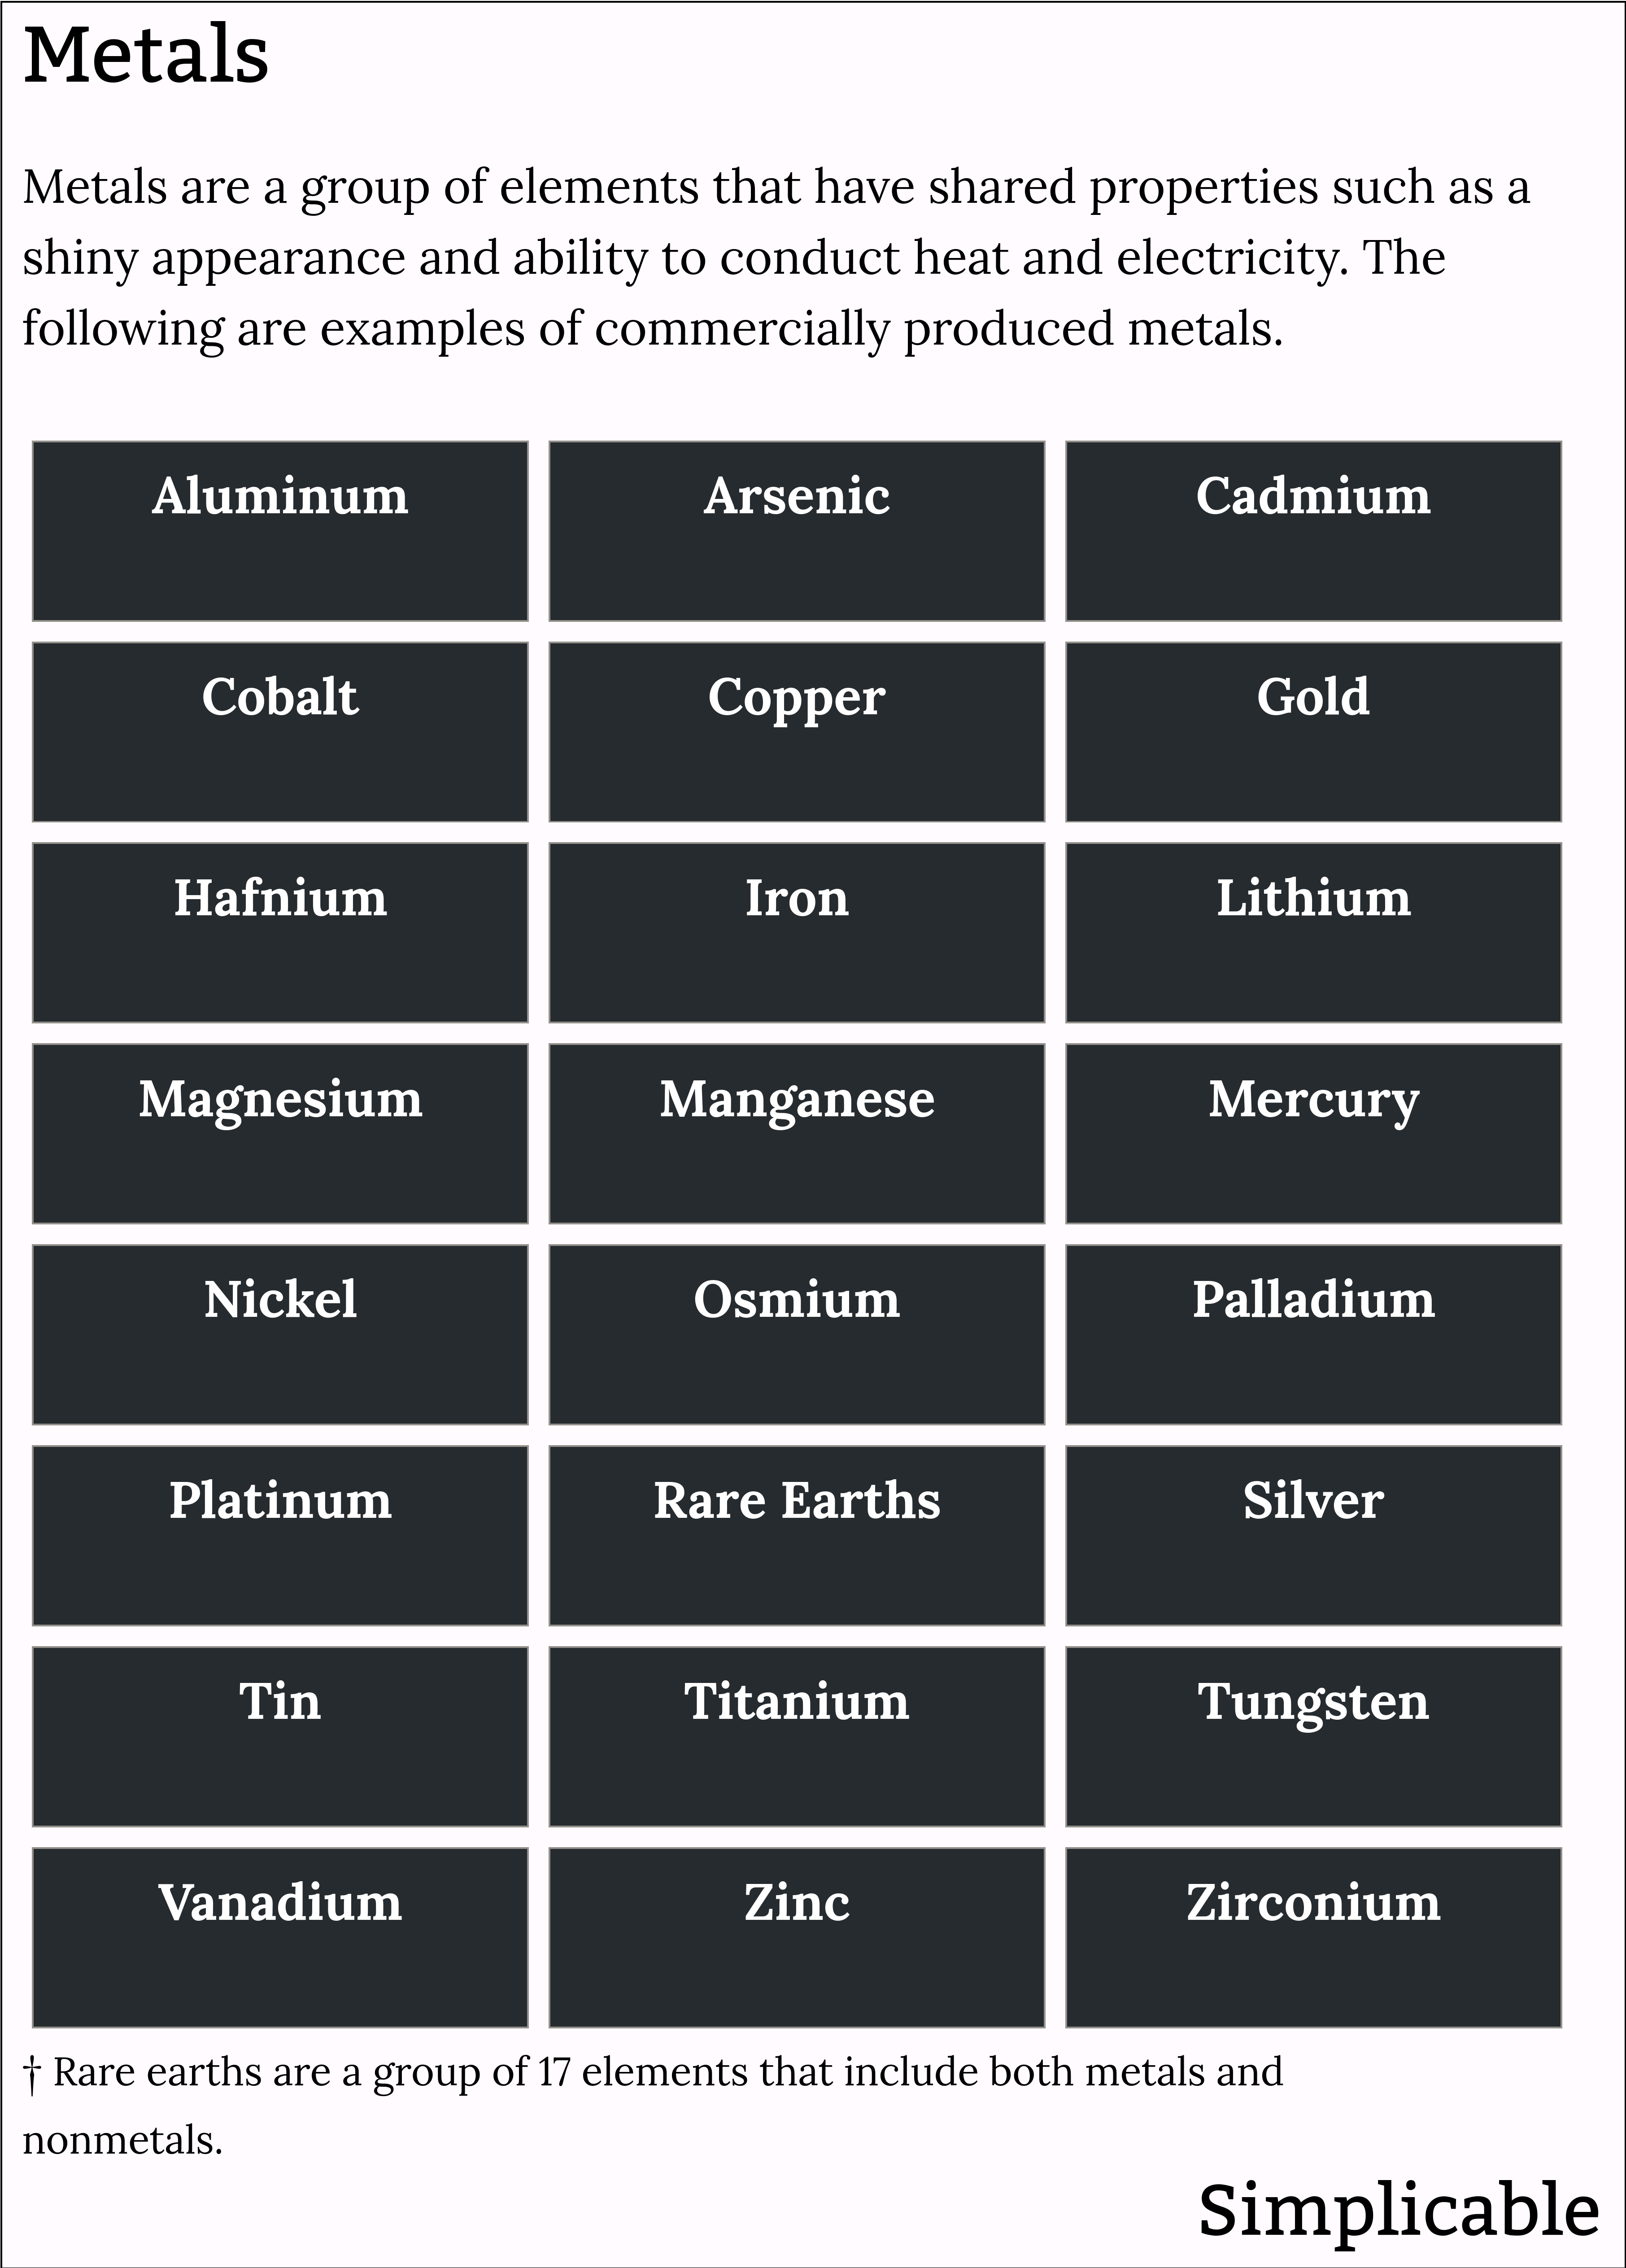 minerals that are metals